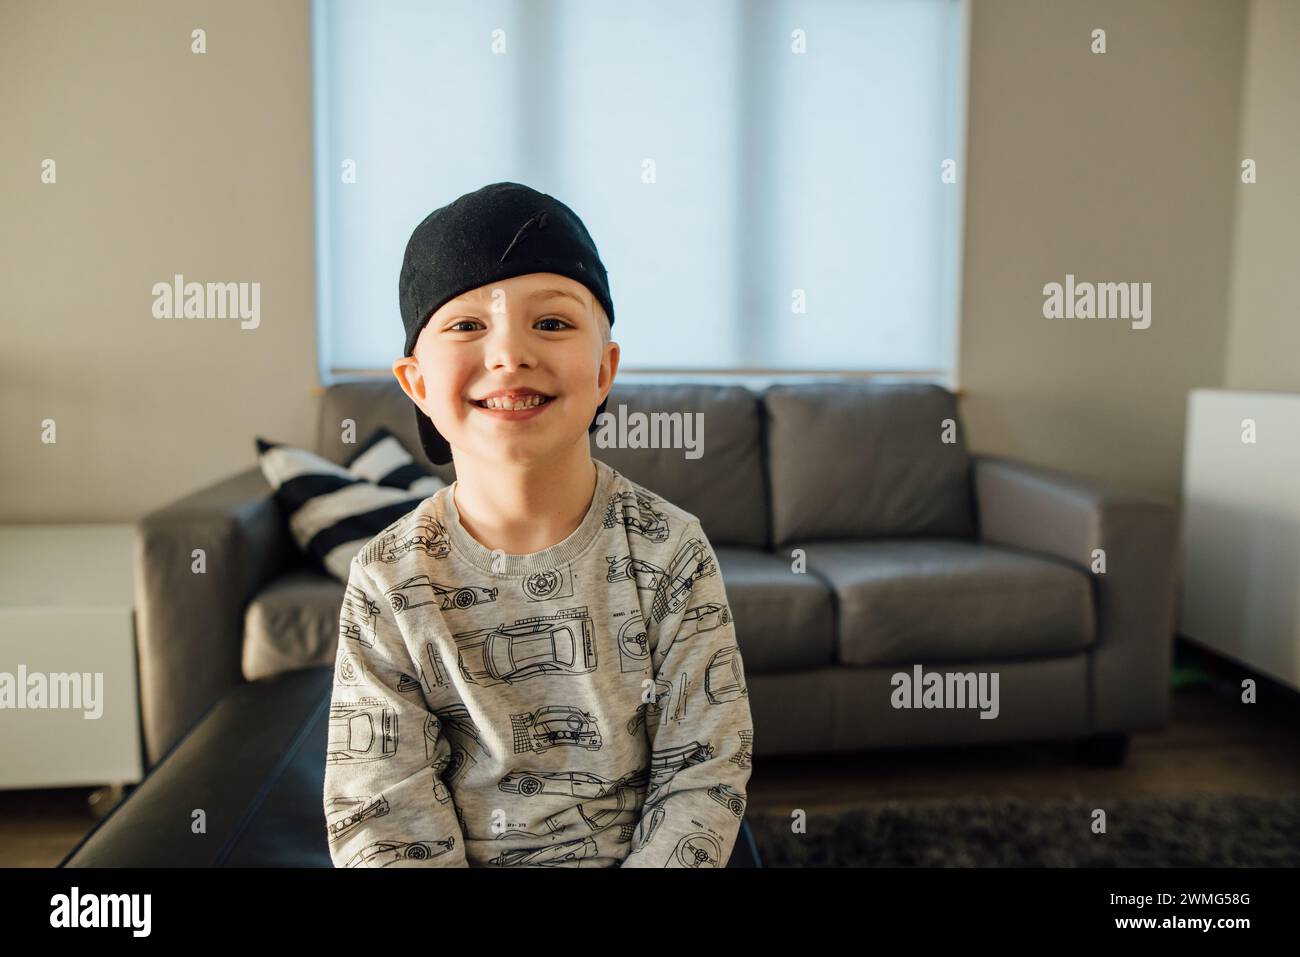 Close up portrait of young boy smiling at camera in living room Stock Photo